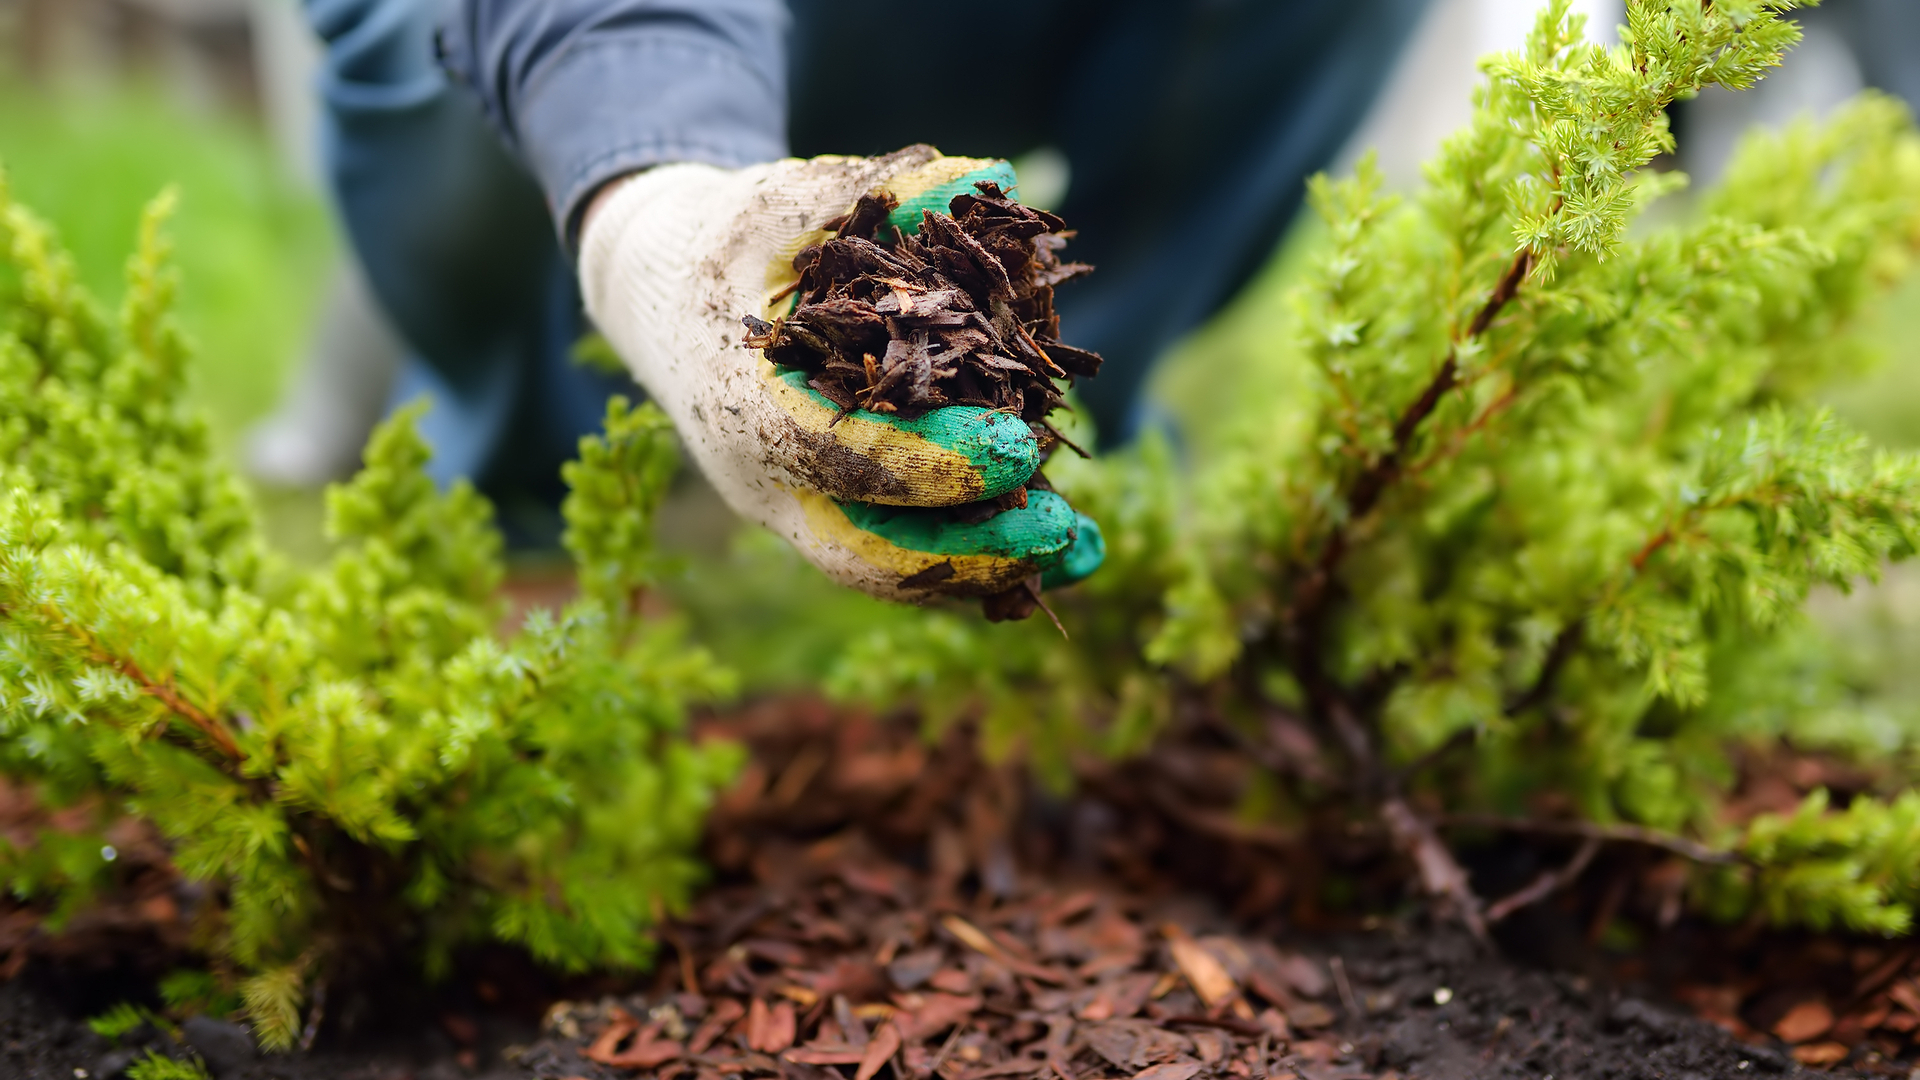 How Often Should You Replenish the Mulch in Your Landscape Beds?